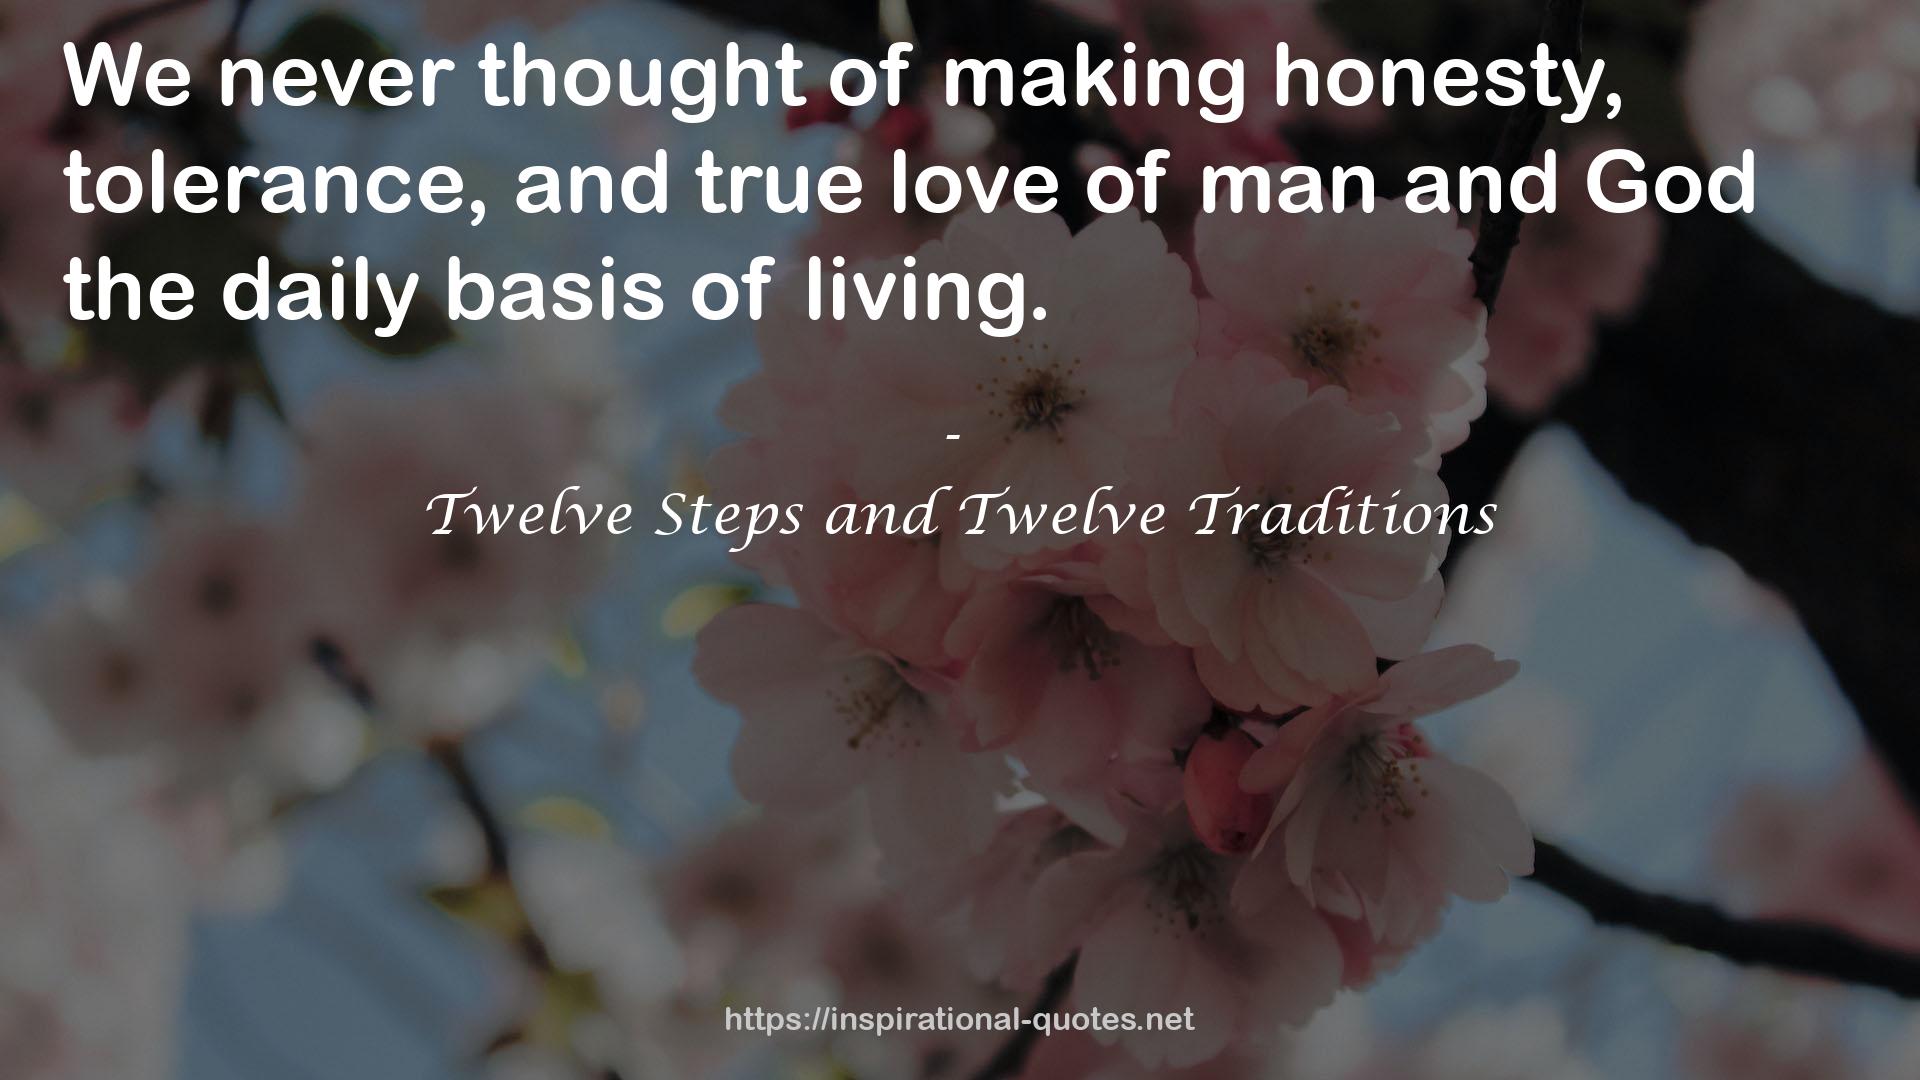 Twelve Steps and Twelve Traditions QUOTES